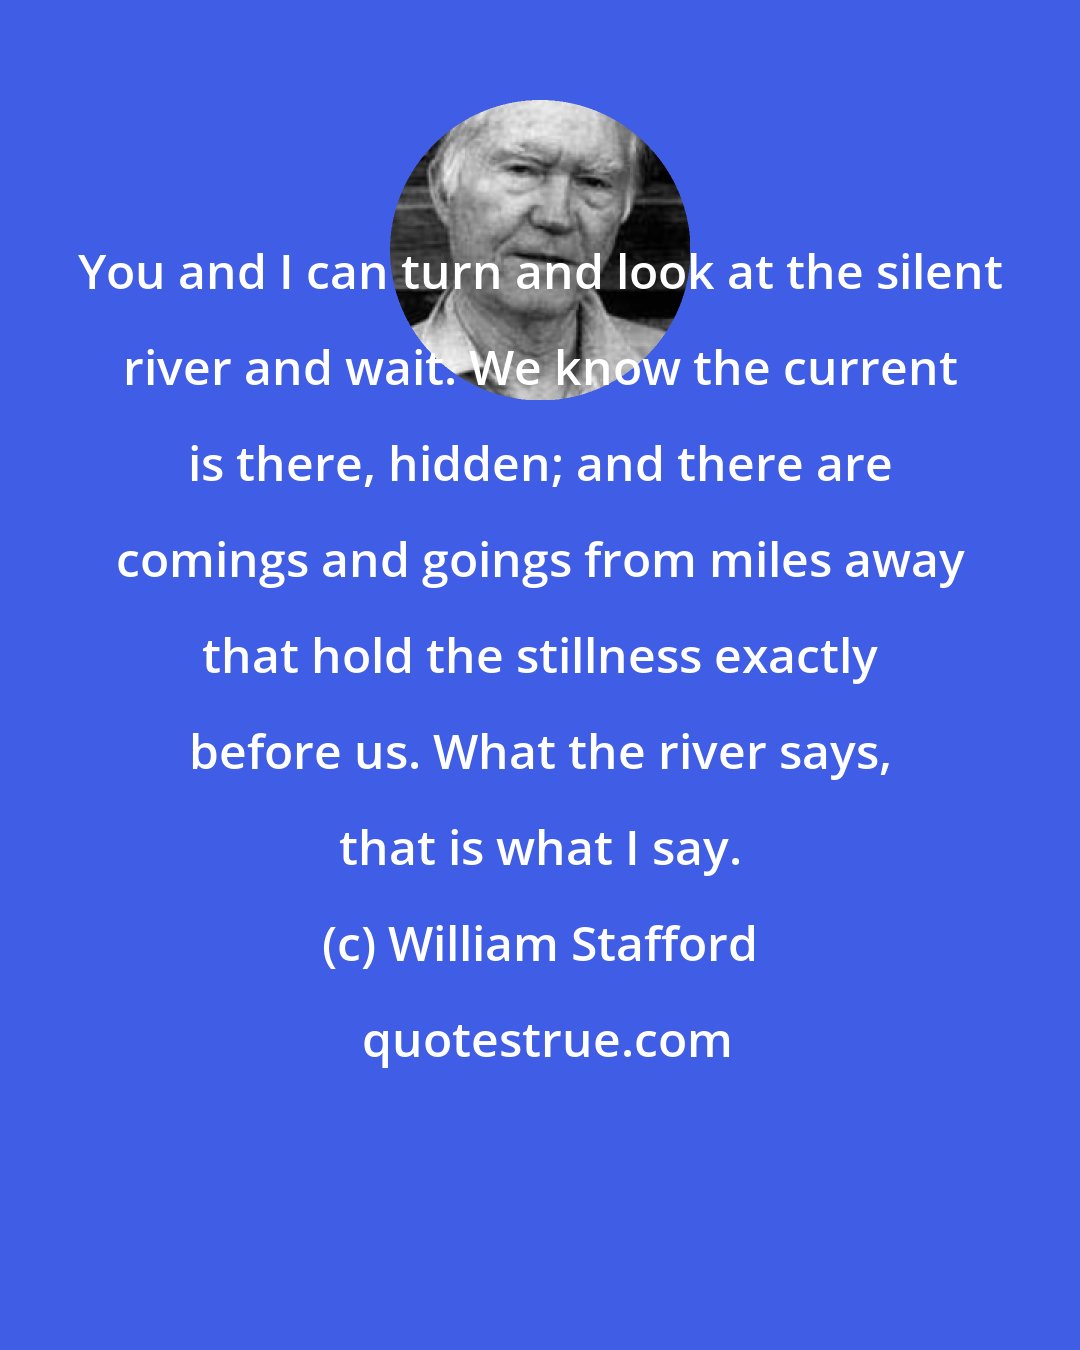 William Stafford: You and I can turn and look at the silent river and wait. We know the current is there, hidden; and there are comings and goings from miles away that hold the stillness exactly before us. What the river says, that is what I say.